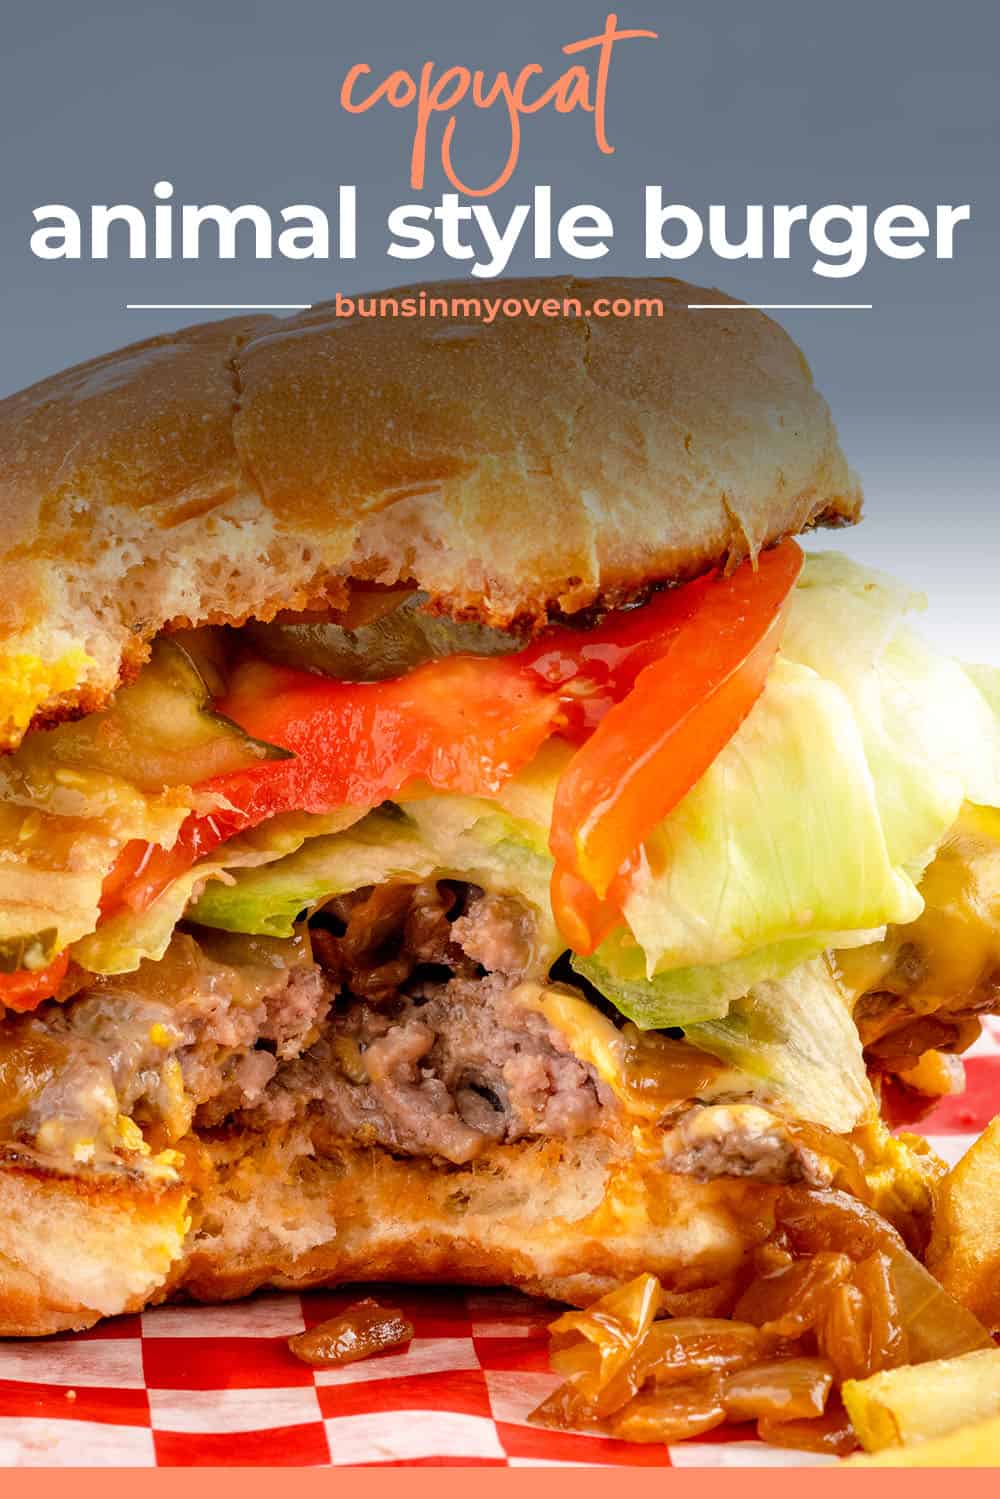 copycat animal style cheeseburger with text for Pinterest.